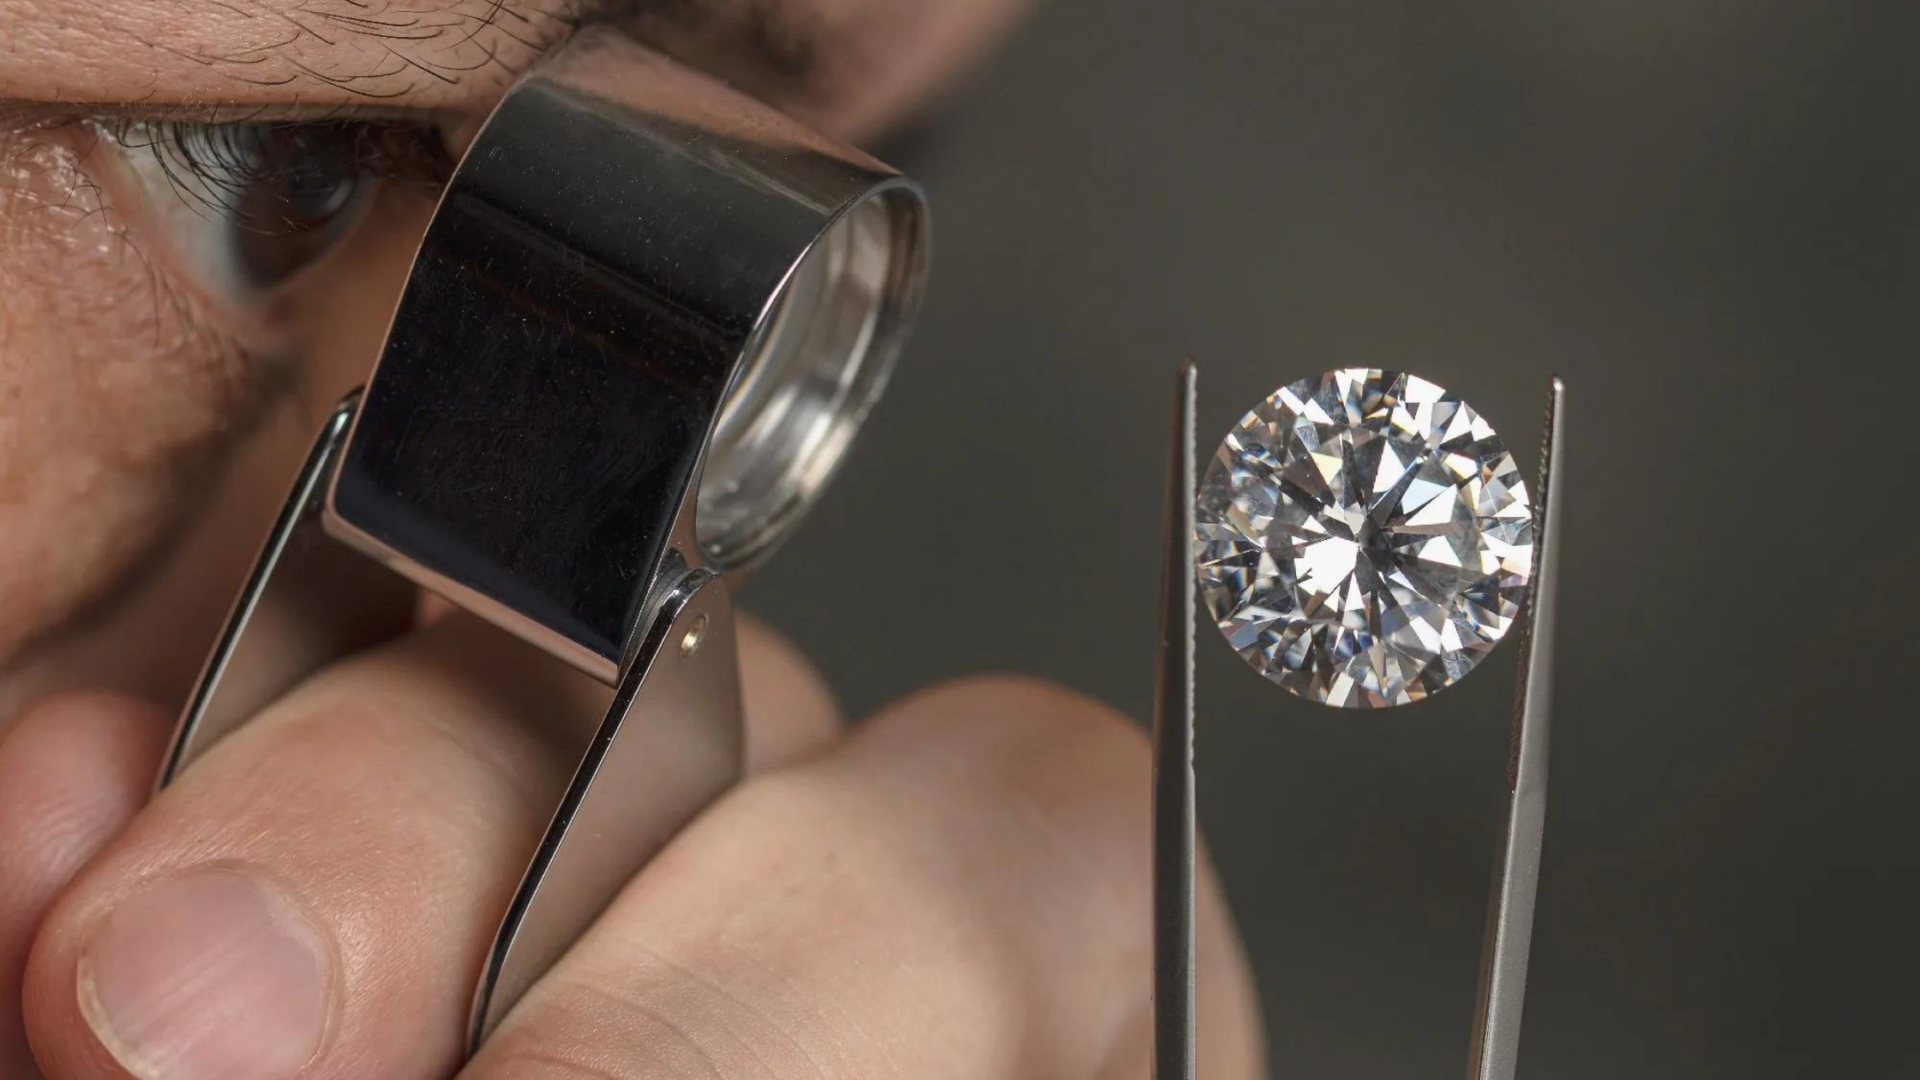 Did I really just pick up a diamond? Here's how to test it at home